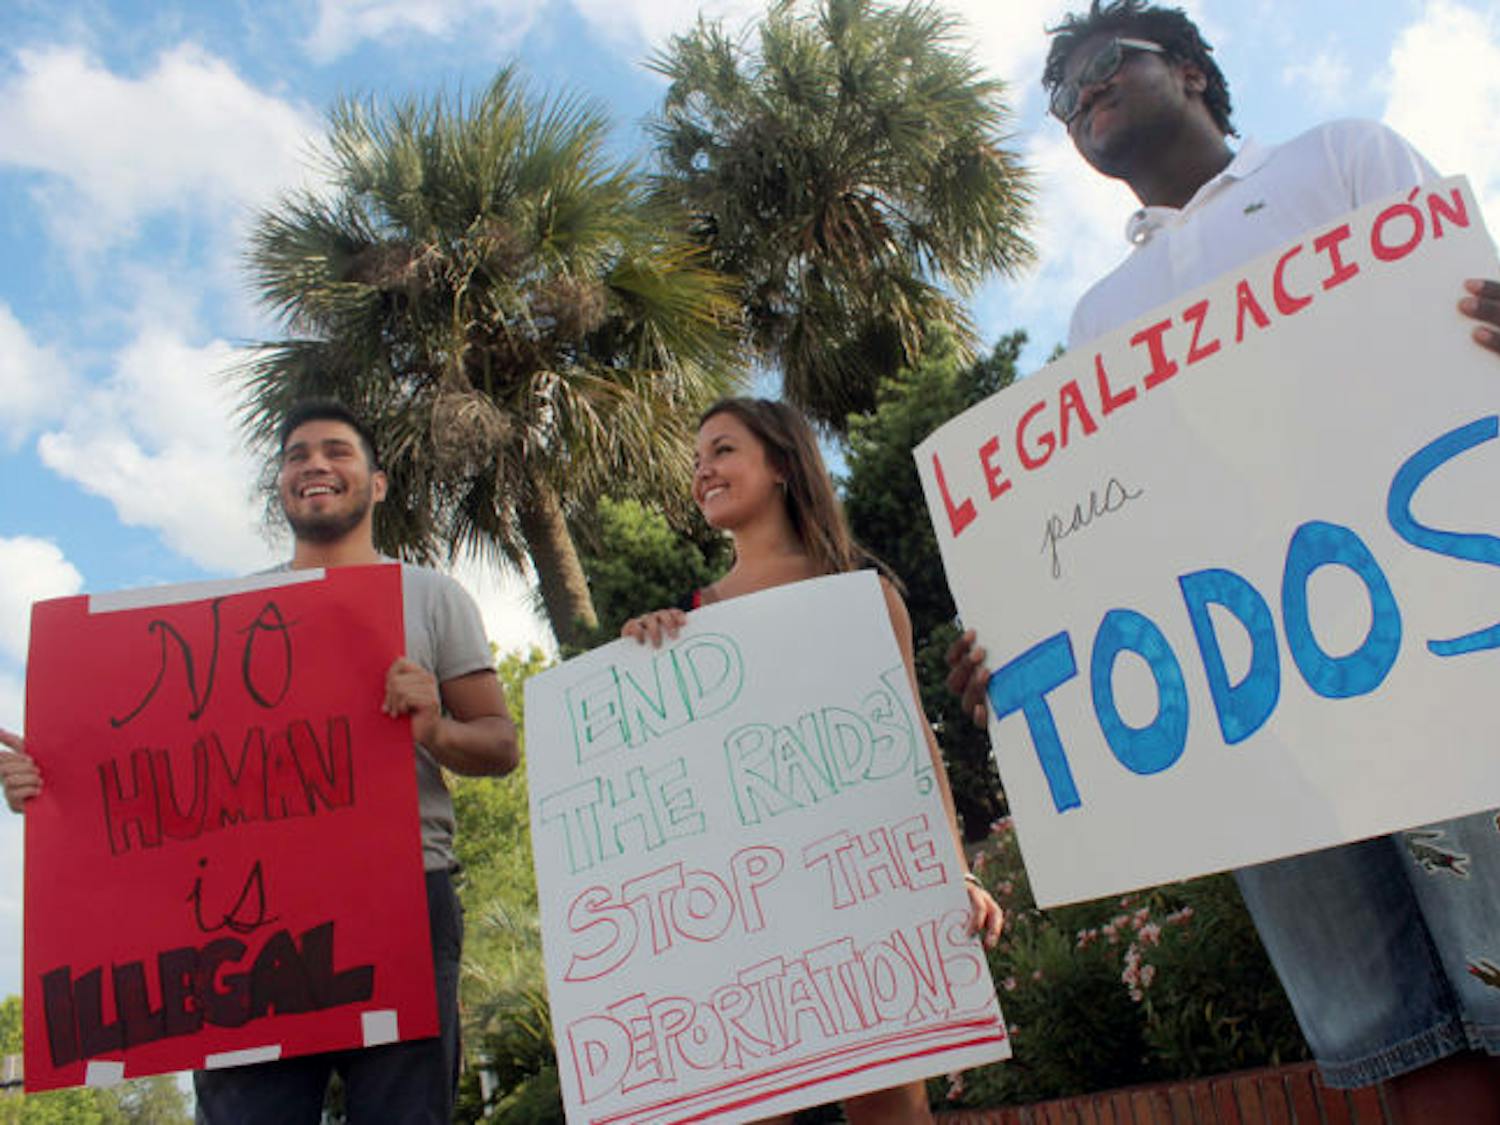 Students for a Democratic Society members hold signs Friday by University Avenue and 13th Street. They demanded Florida driver’s licenses for undocumented people and legalization for all immigrants.